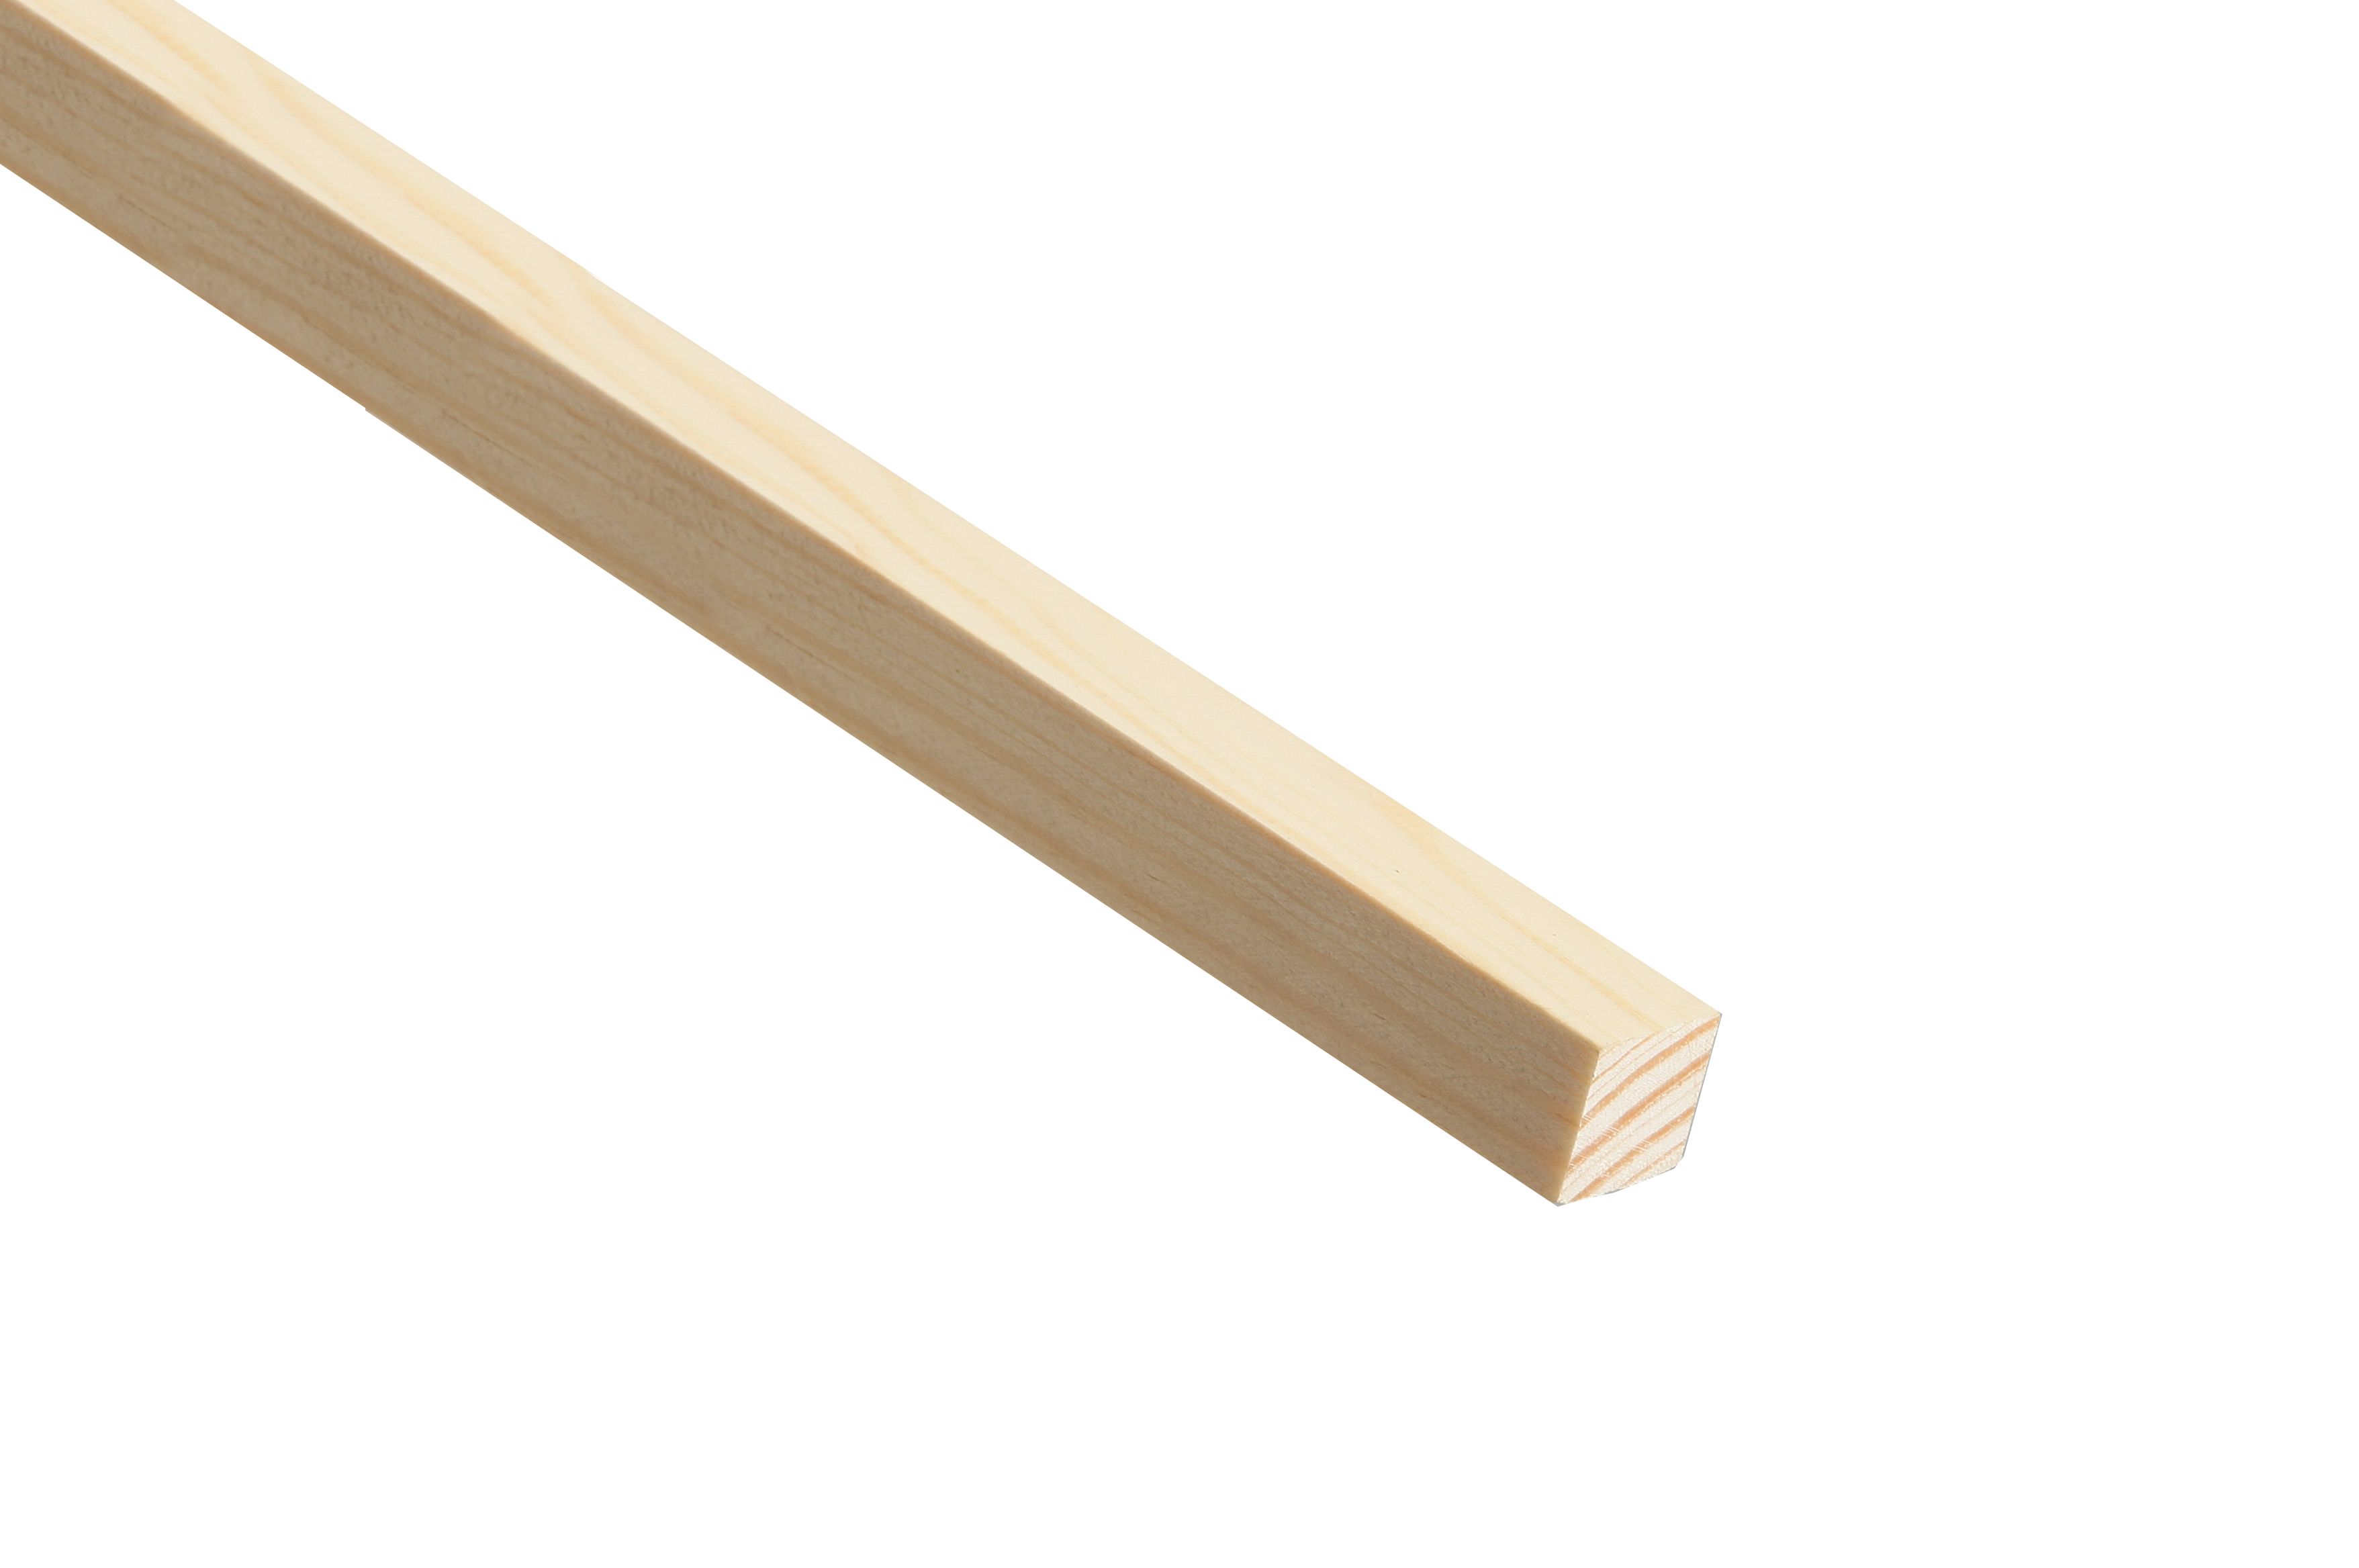 Image of Wickes Pine Stripwood Moulding (PSE) - 15 x 15 x 2400mm